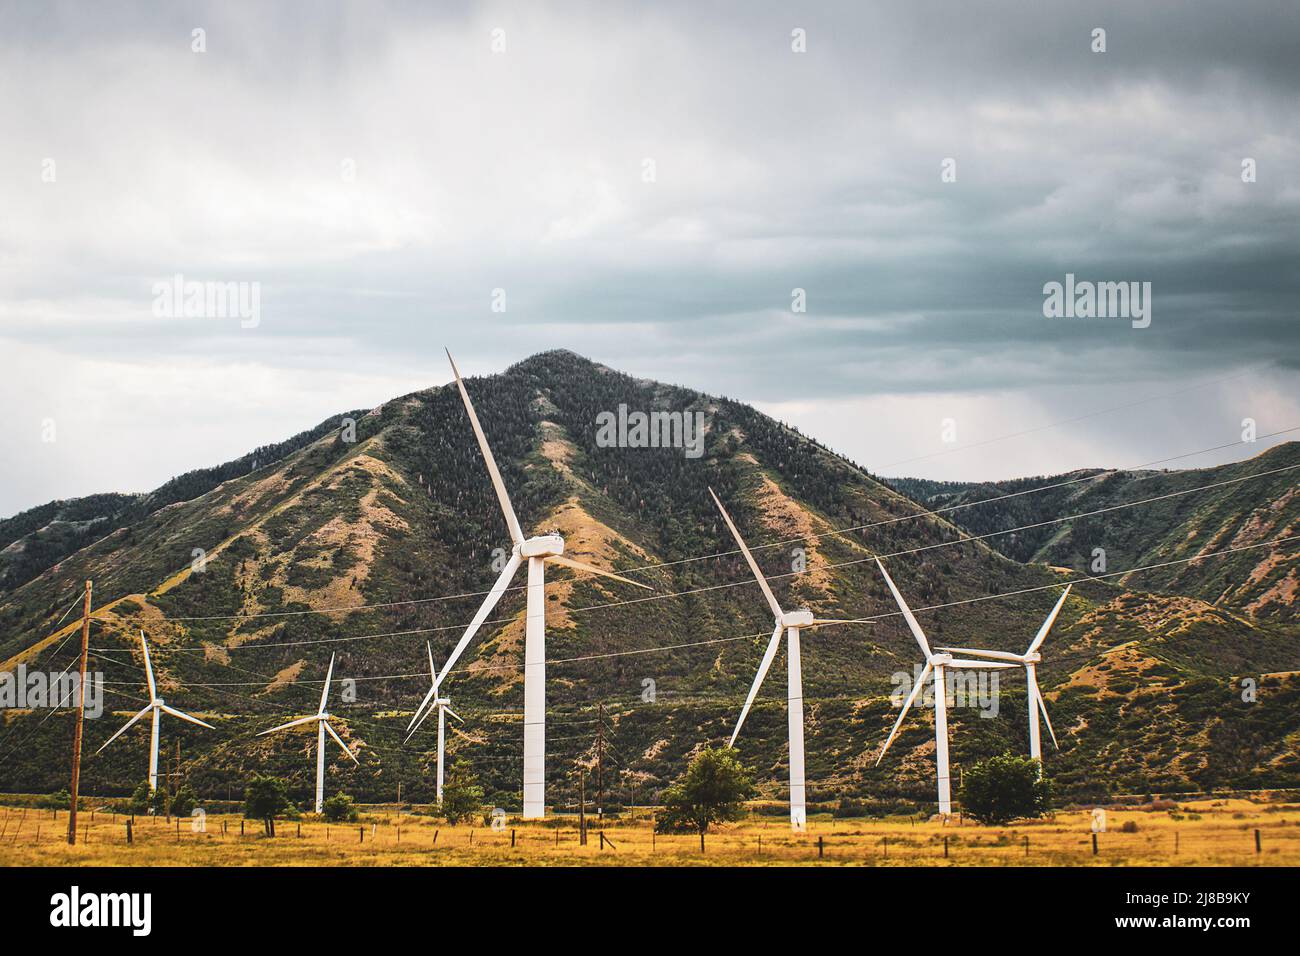 Wind turbins in a field with mountains in the background under overcasst skies. Powerlines are also strung around - Idaho USA Stock Photo